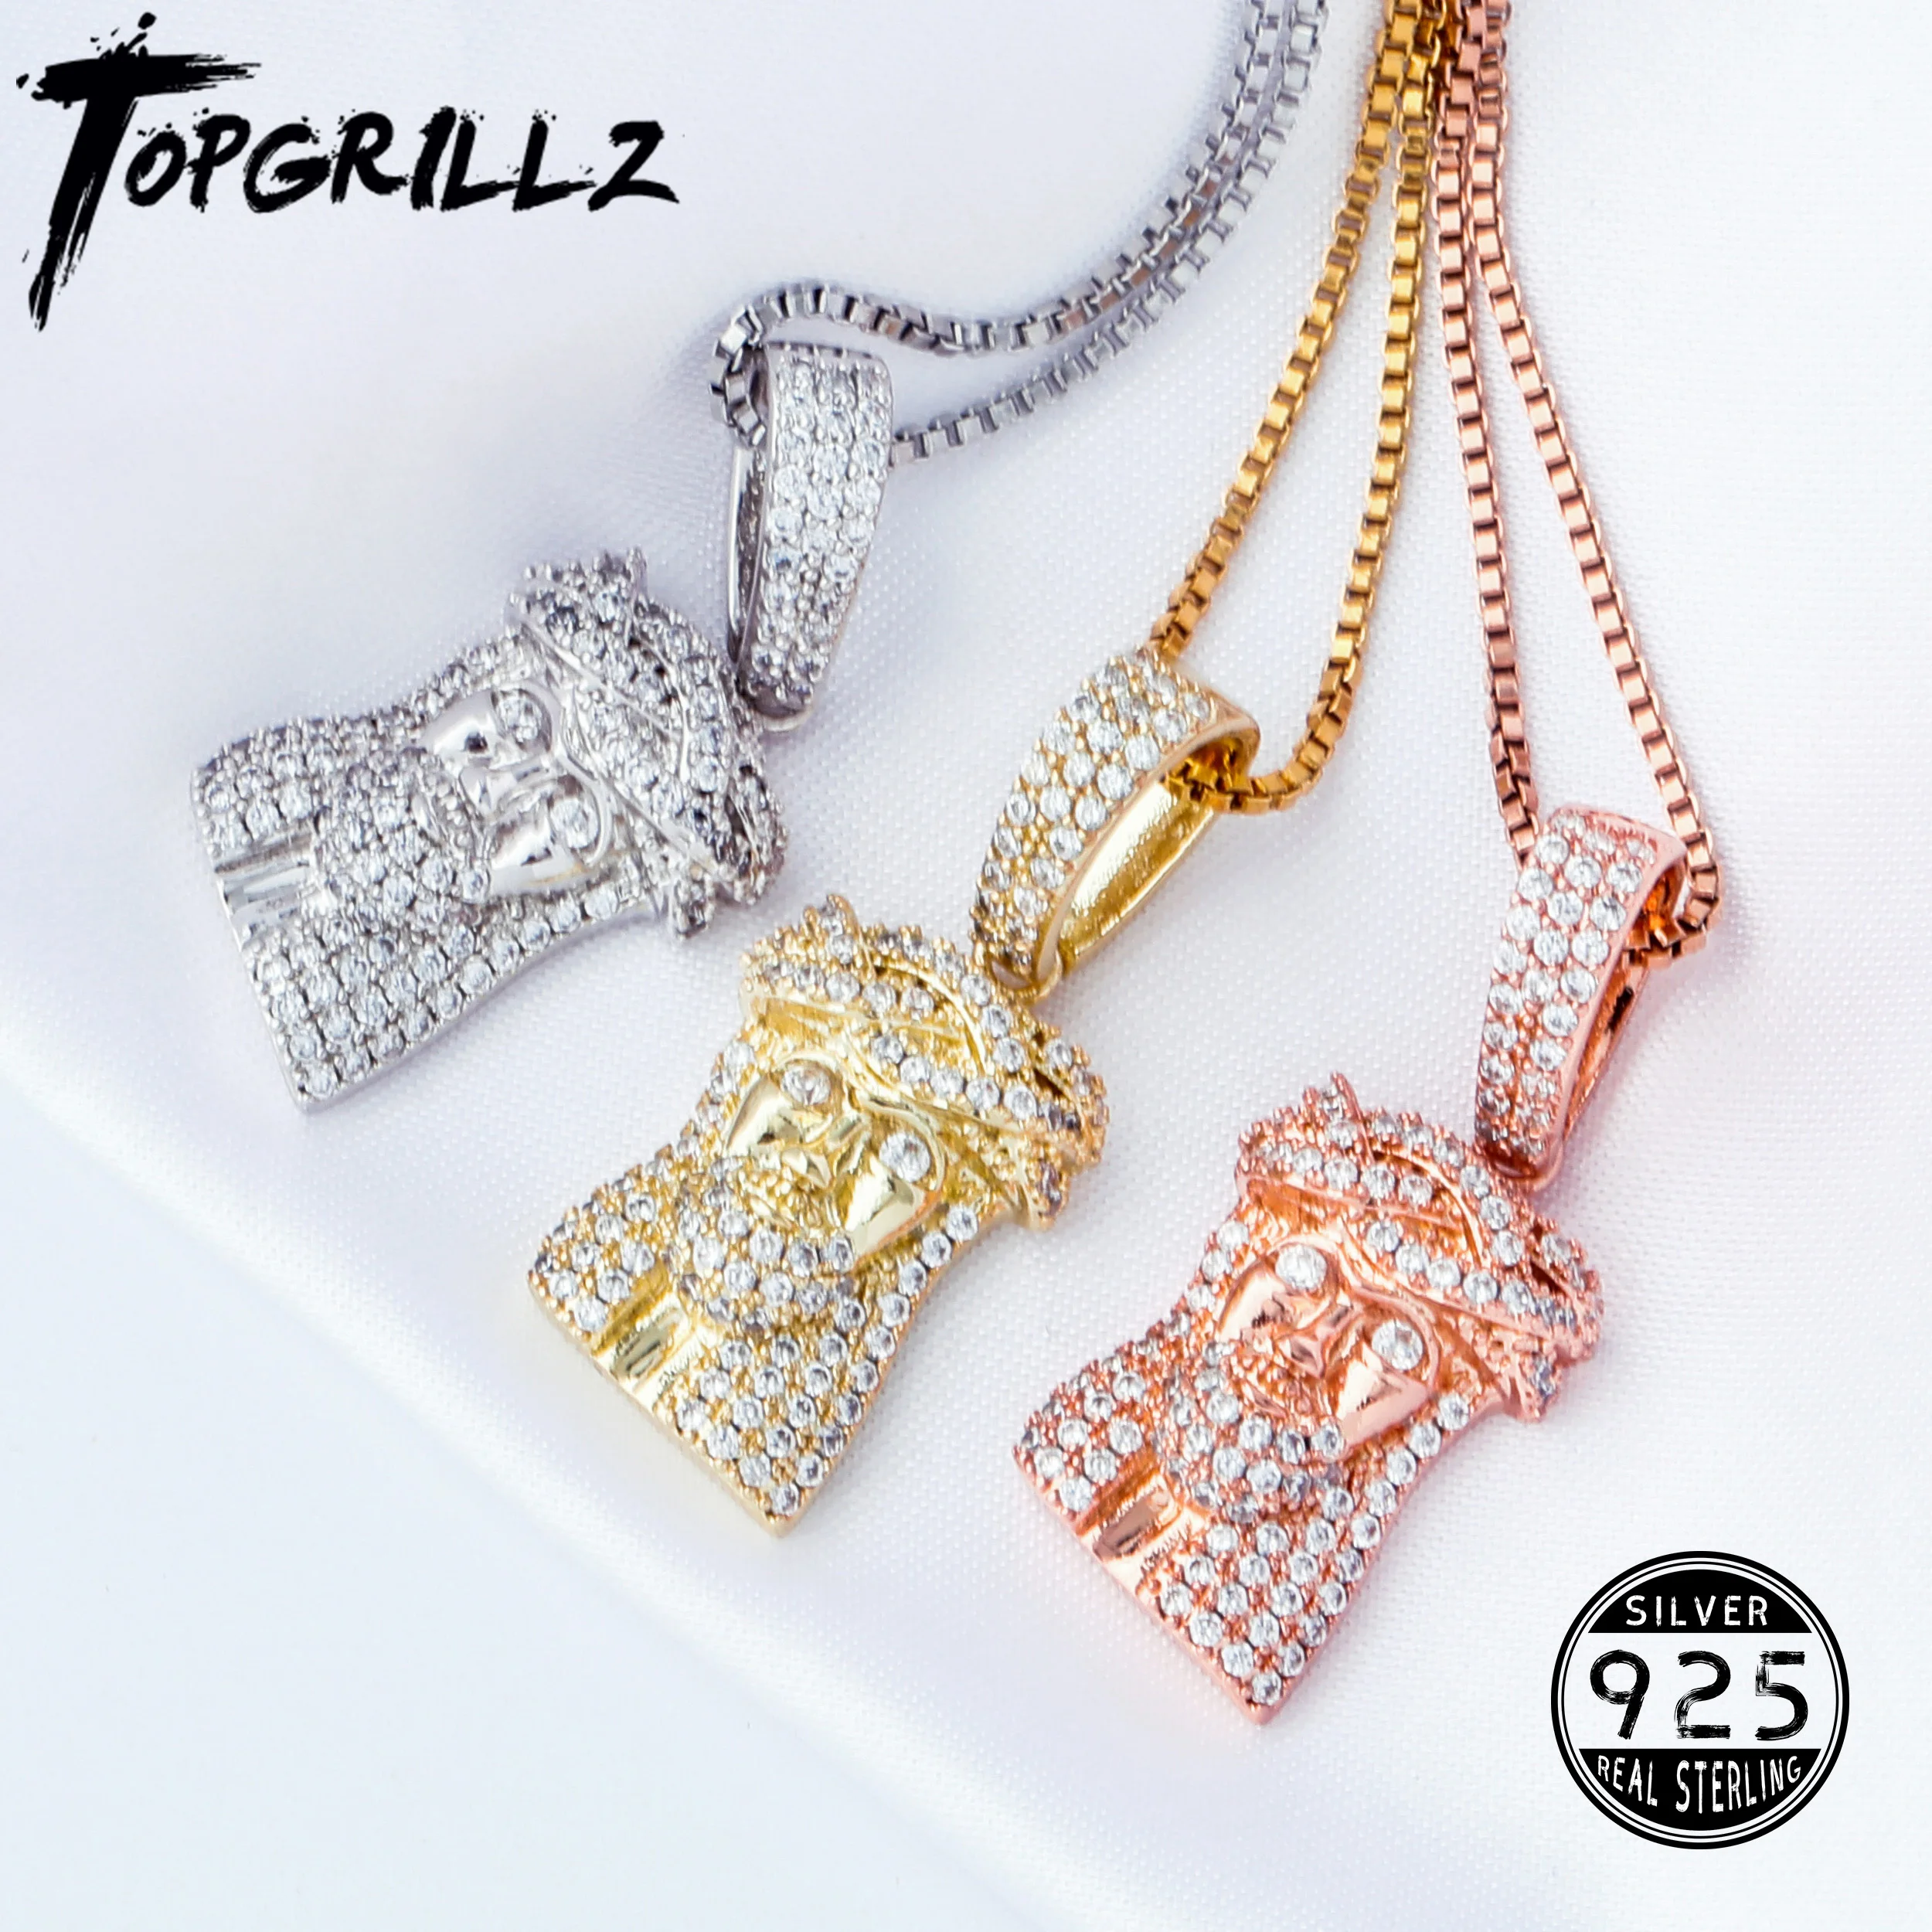 TOPGRILLZ 925 Sterling Silver Jesus Pendant Iced Out Cubic Zirconia Women's Pendant Hip Hop High Quality Charm Jewelry For Gift